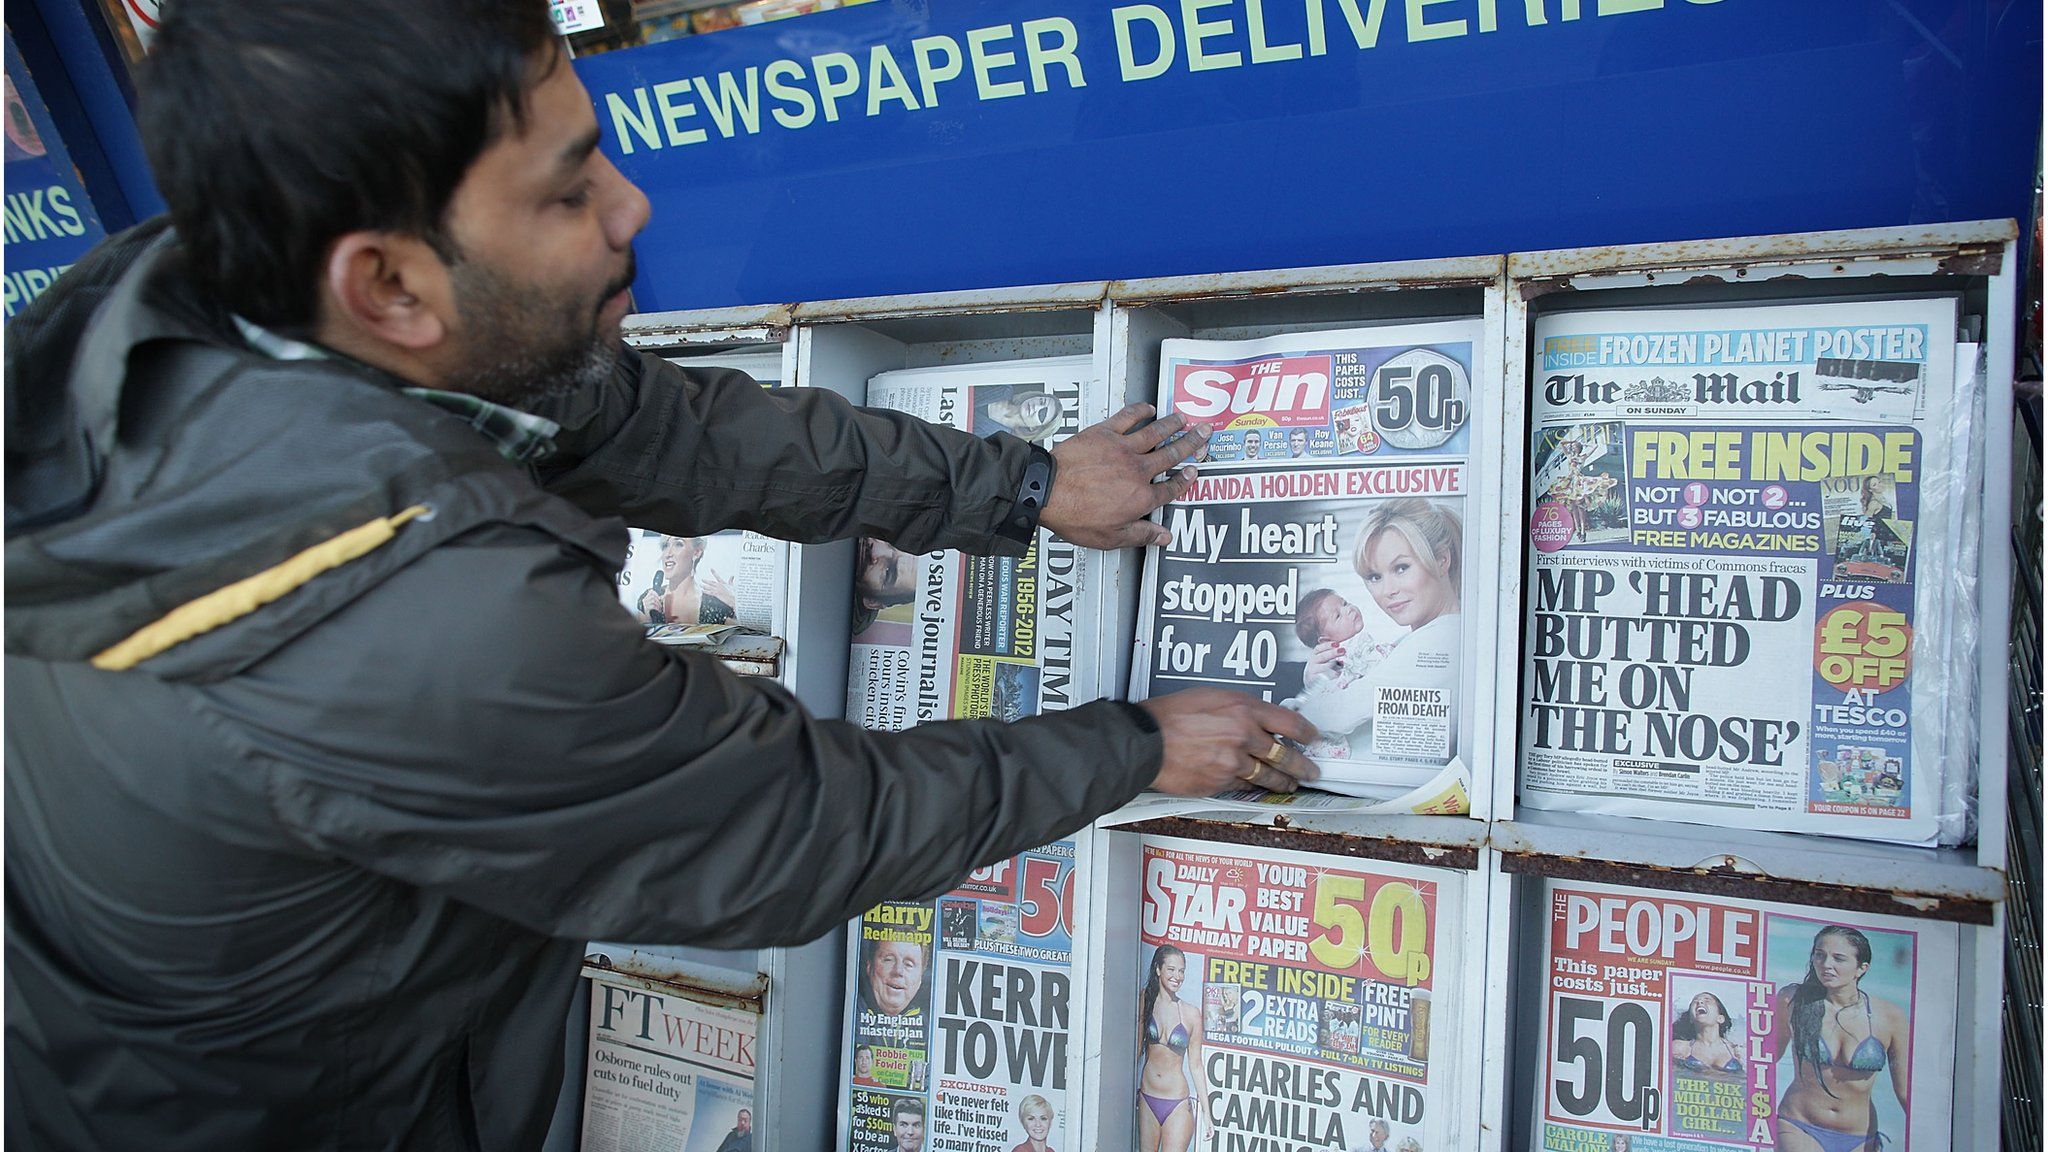 Man taking newspaper from stand